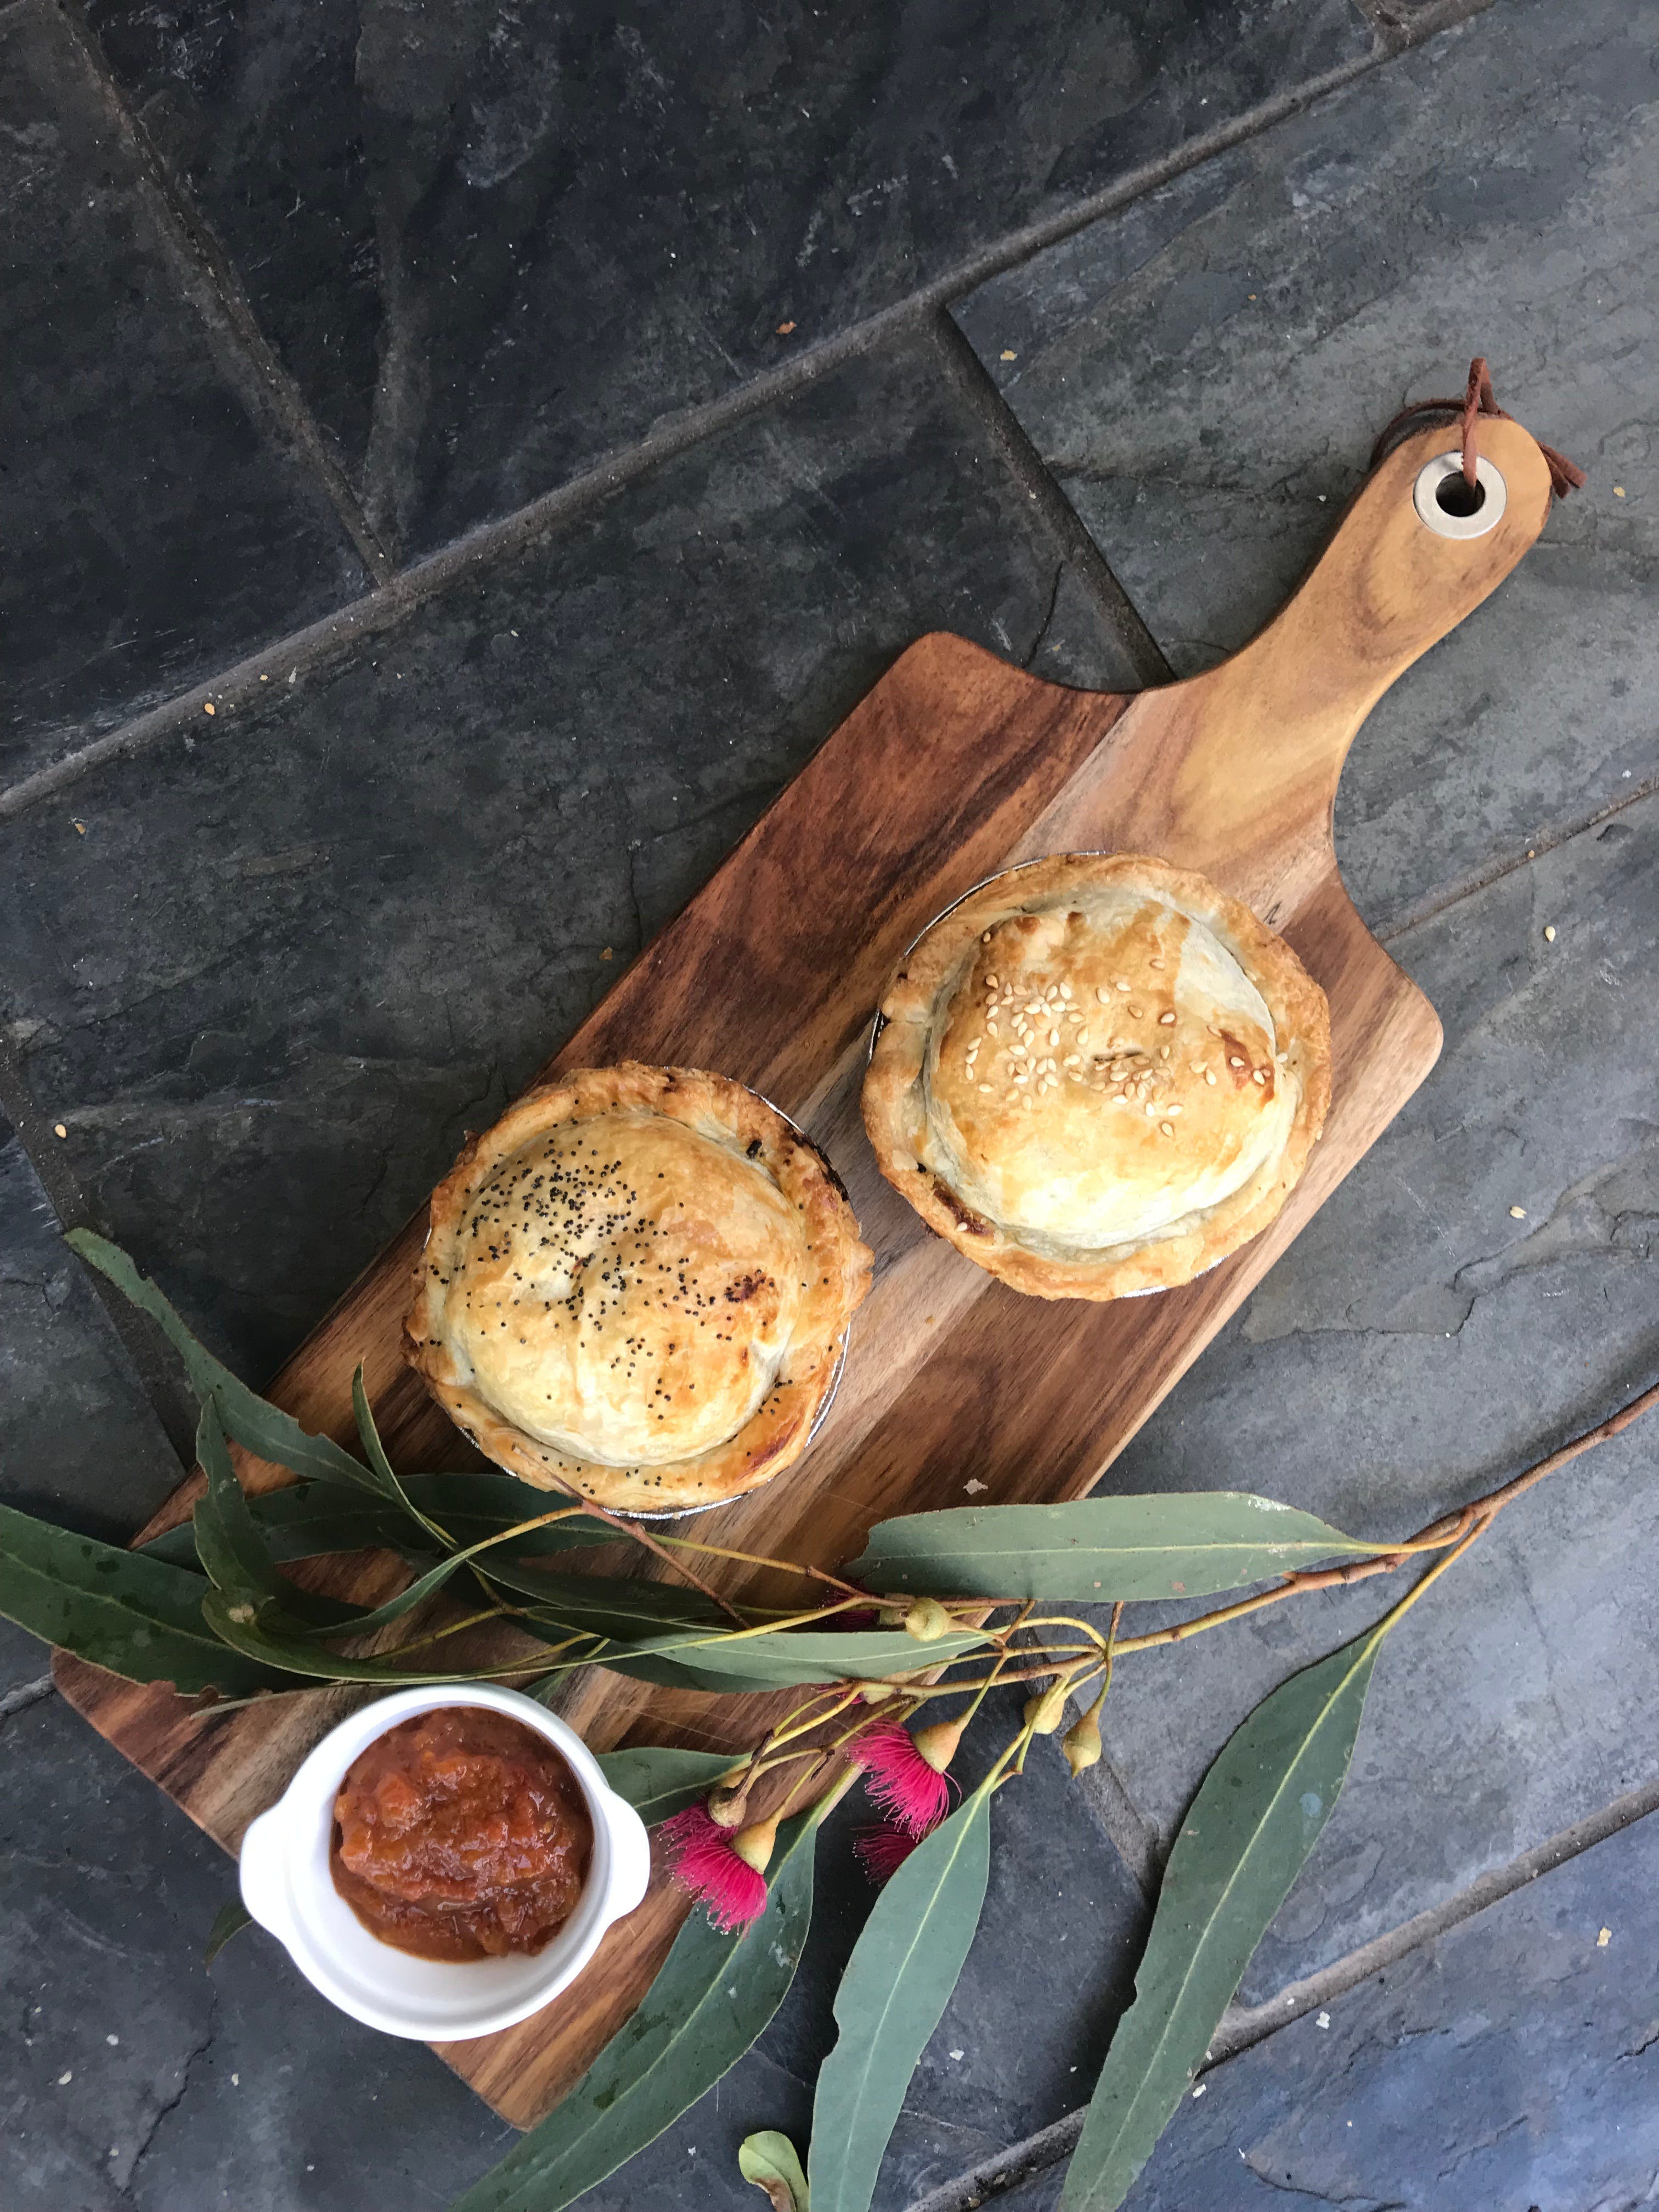 Aged Wine and Vintage Pies - Tourism Bookings WA